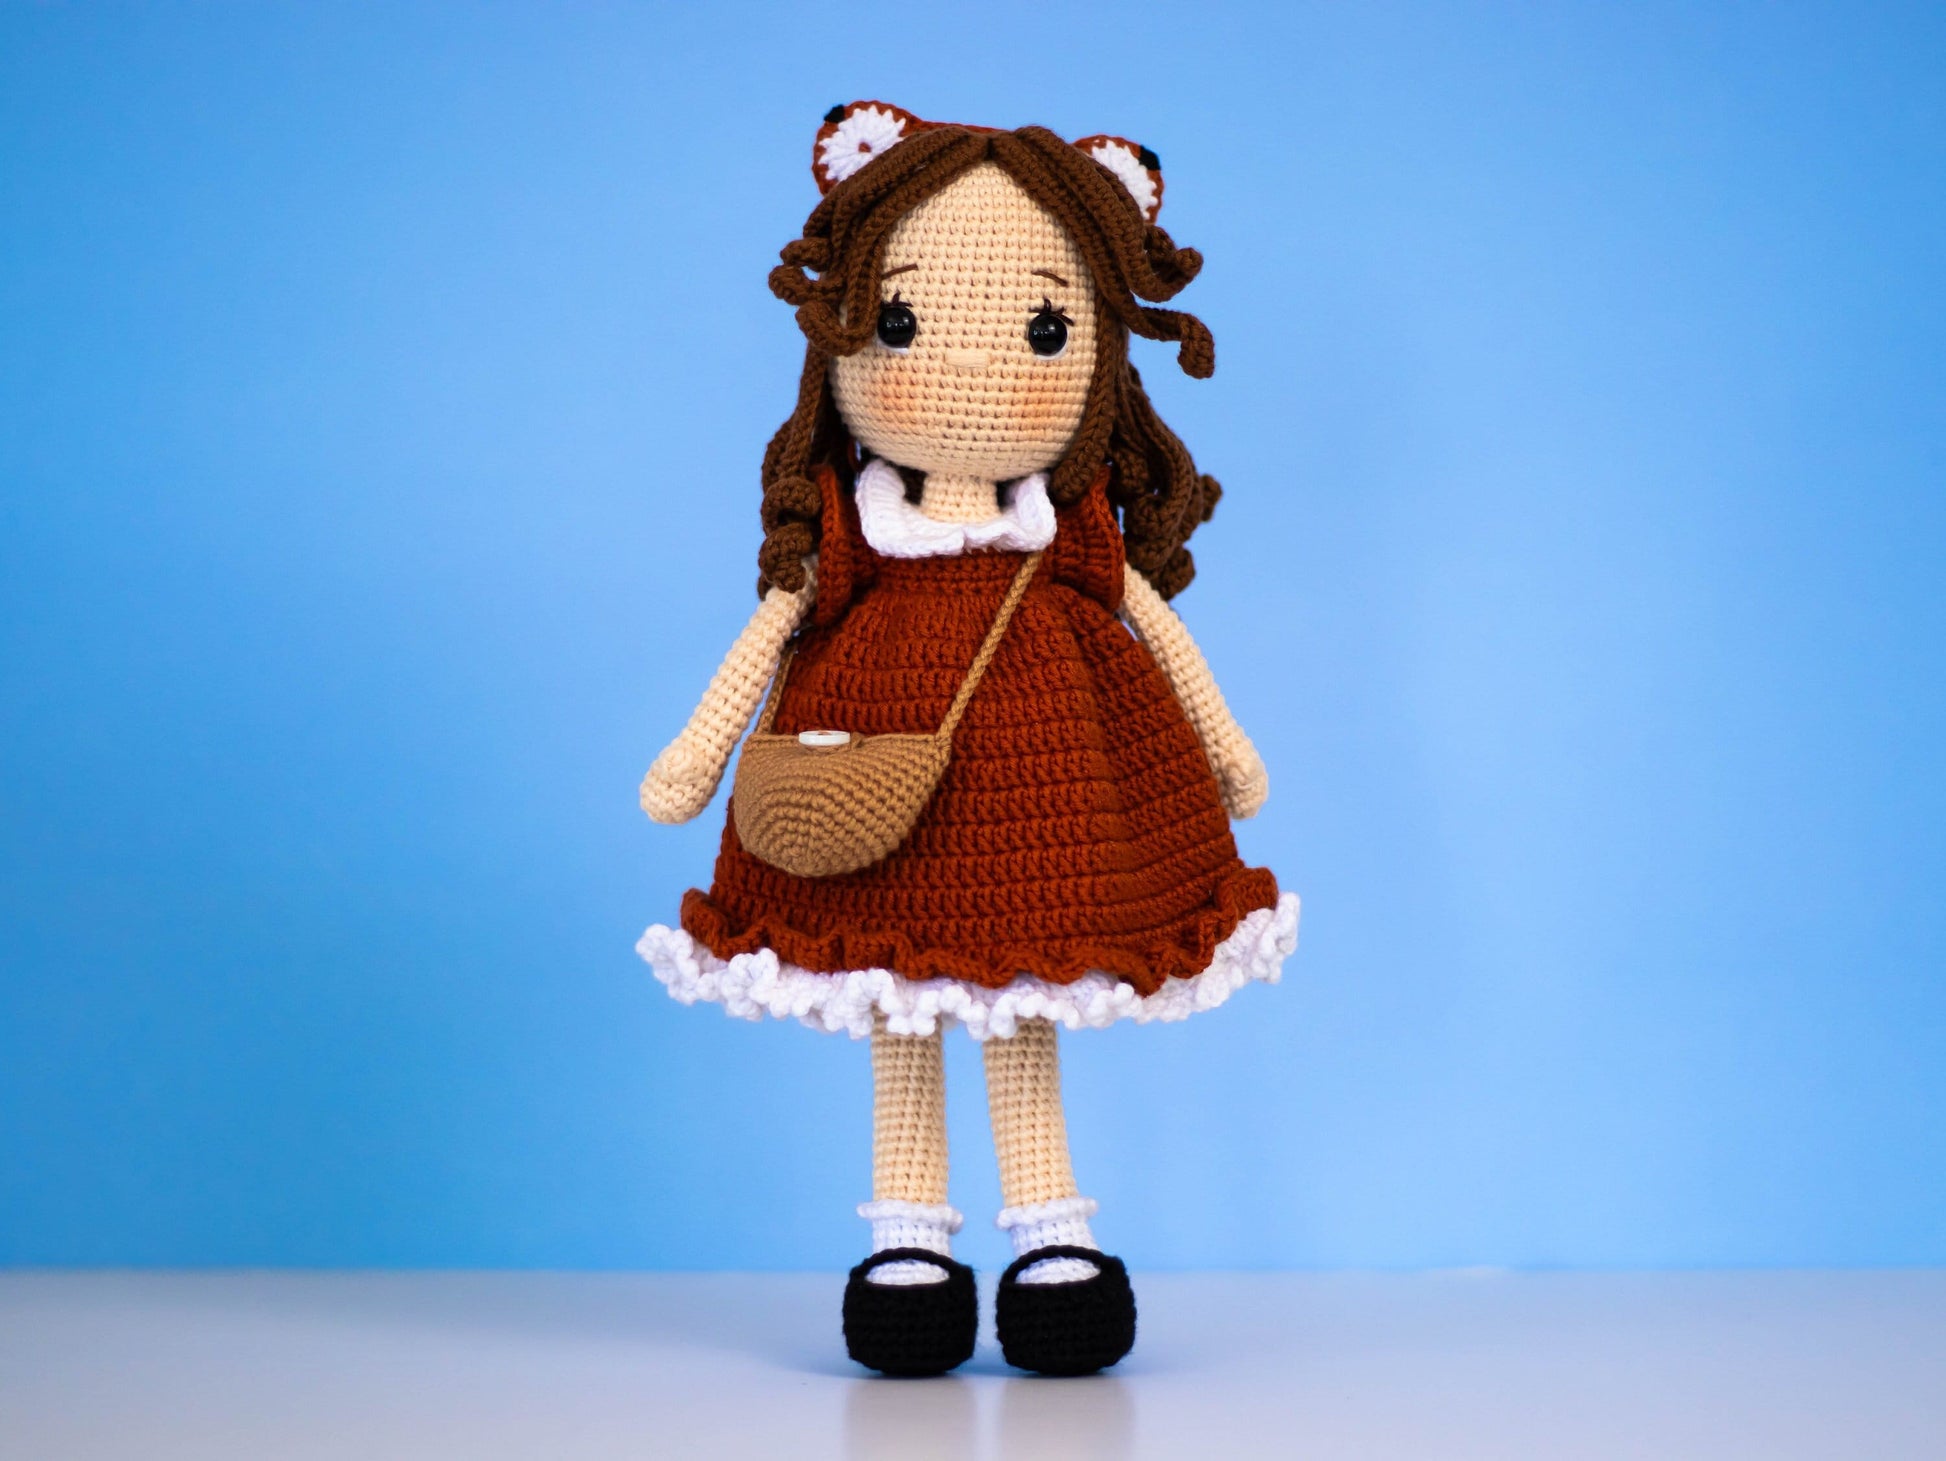 Crochet Doll with Cat Ears, Crochet Doll for Sale, Amigurumi Doll Finished